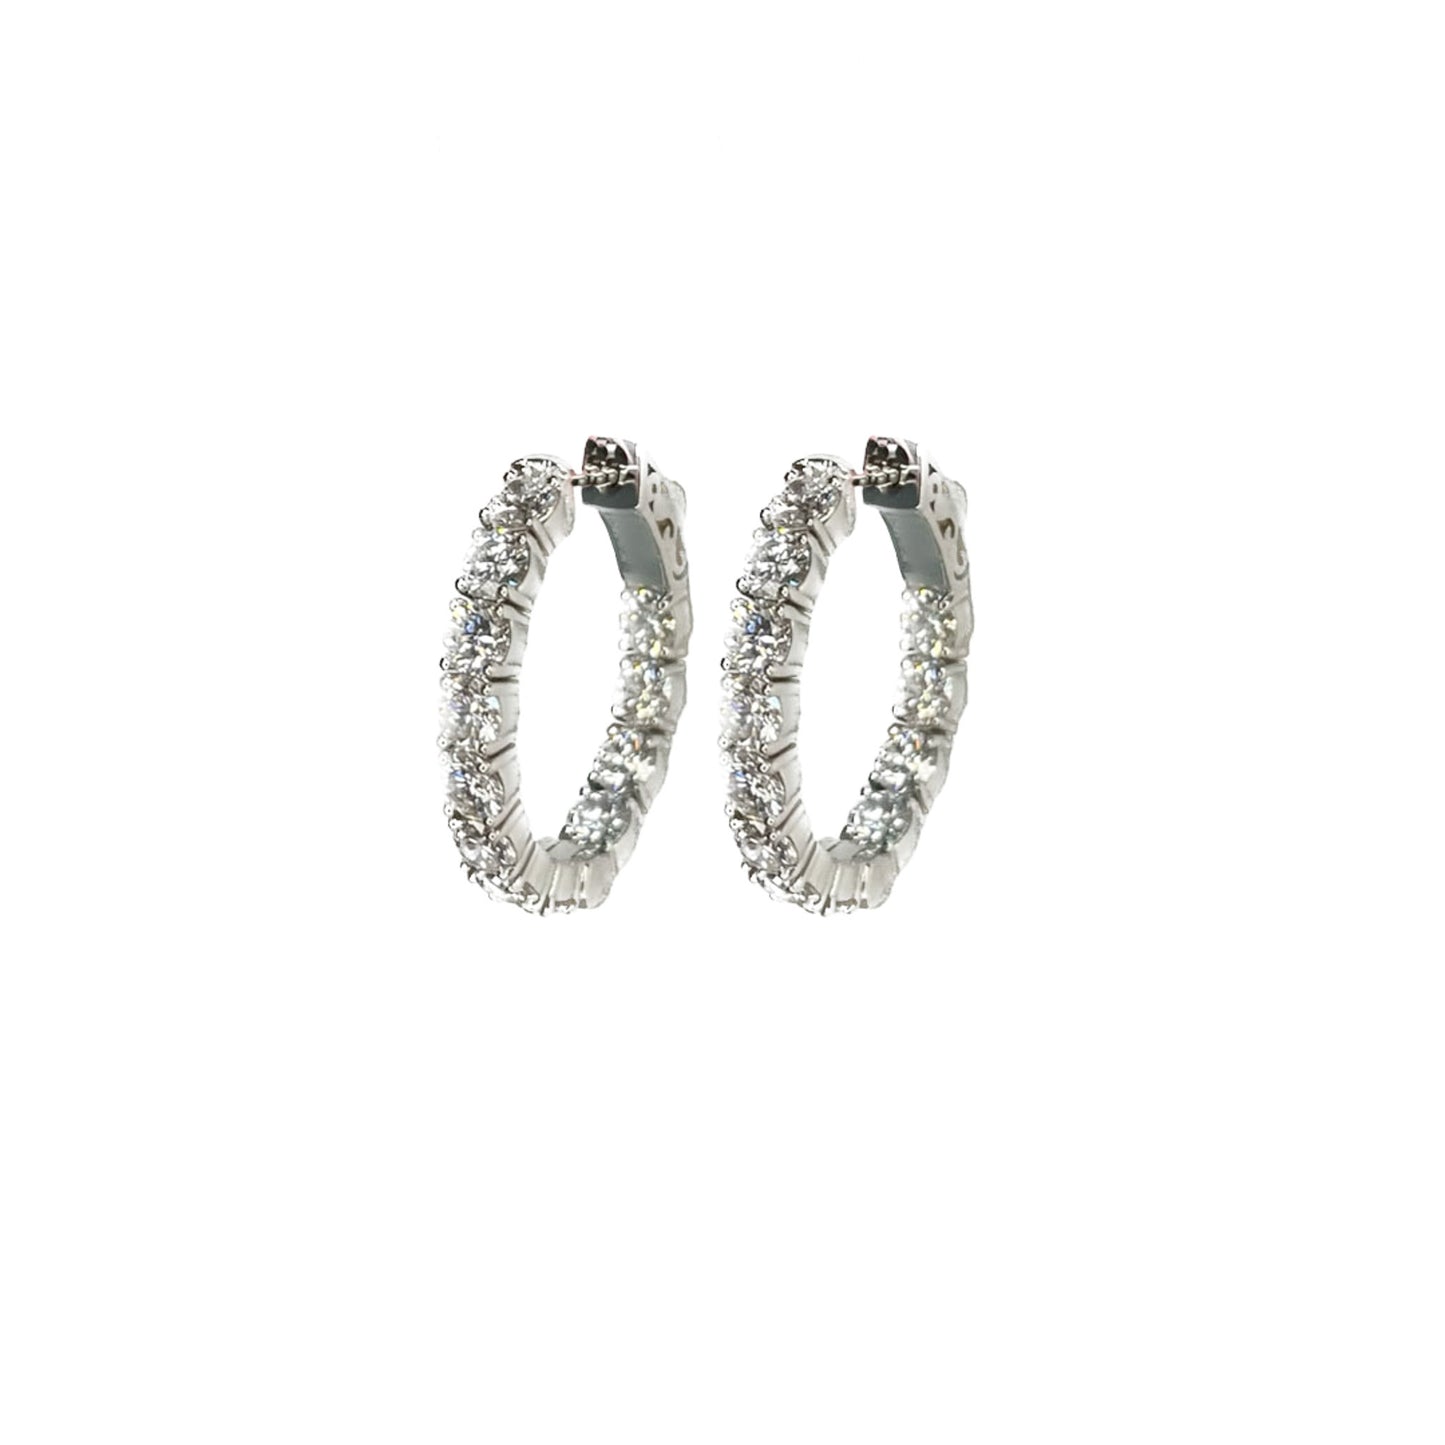 Inside-Out Diamond Hoops - 3.68 CT